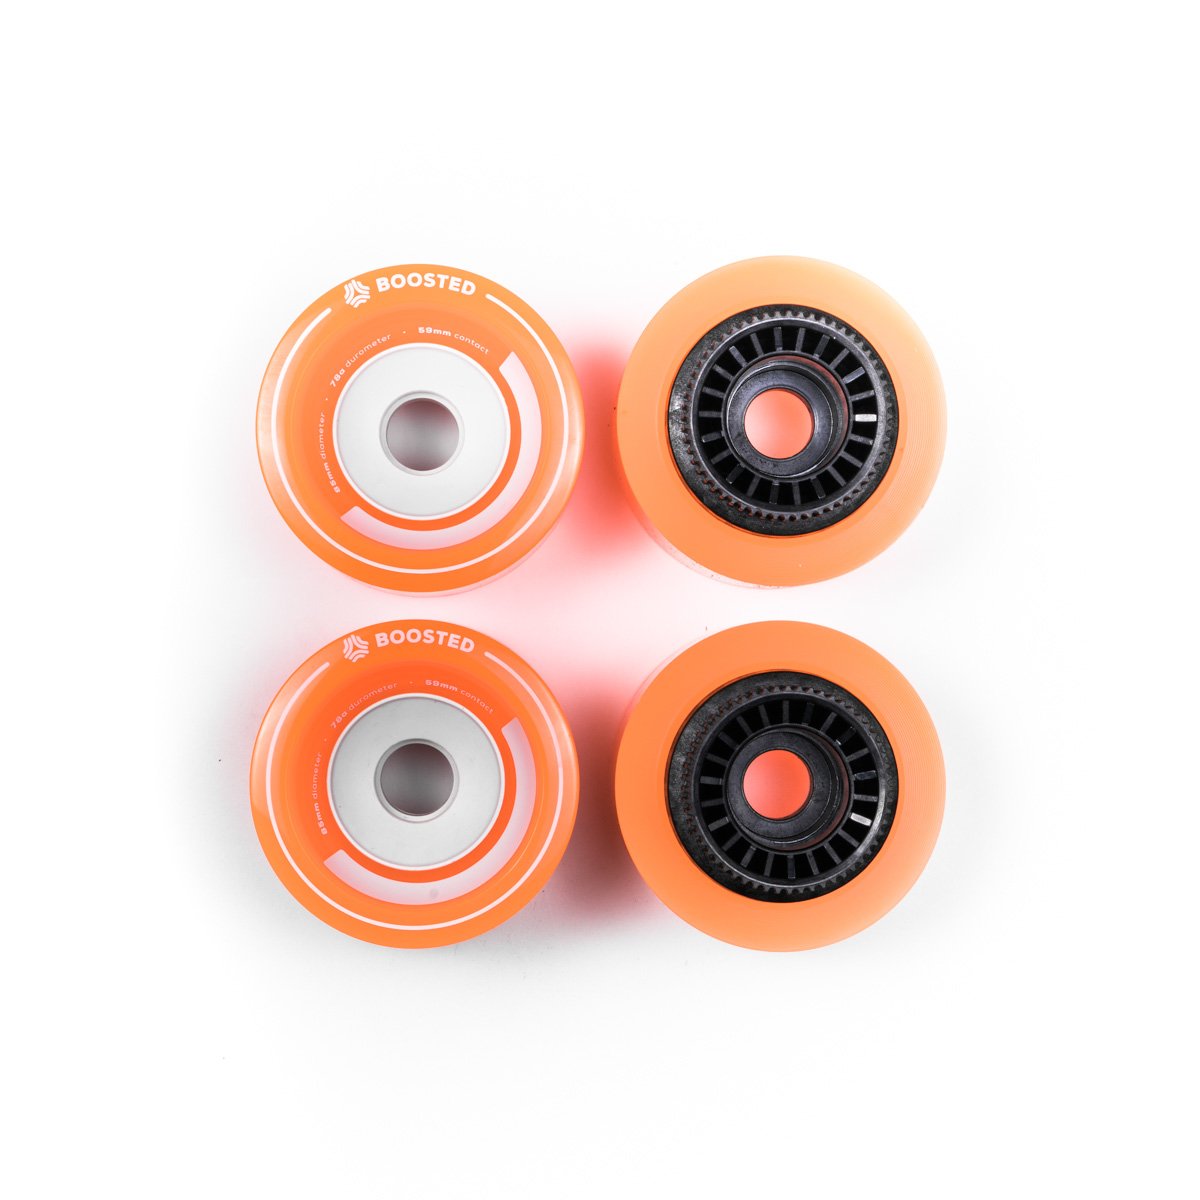 Boosted Stratus full set of 4 wheels 85mm - Orange The classics! Sometimes bigger is better. Boosted Stealth comes stock with new, custom-designed Stratus wheels. They spent countless hours studying different core geometries and flex profiles to design a wheel with the right combination of grip, flex, and rebound. At 85mm, these wheels deliver the highest roll speed of any Boosted board to date. The Boosted Stratus wheels 85mm - Orange fit the Boosted Boards Stealth and Boosted Boards Plus.